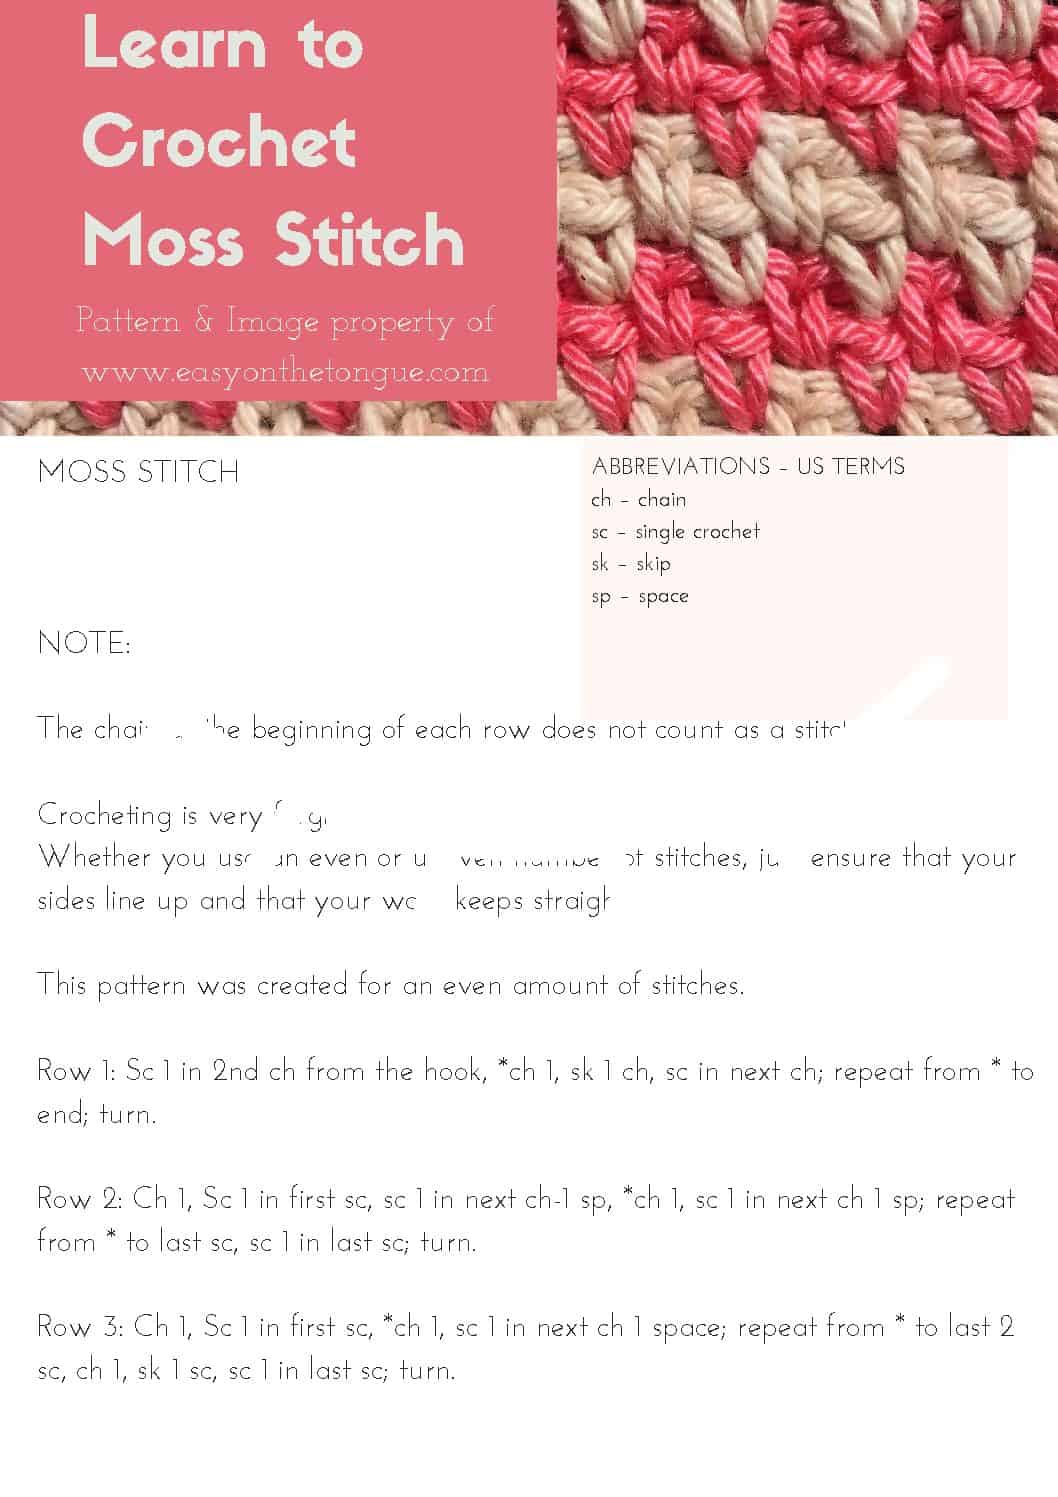 Learn to Crochet Moss Stitch A4 1 pdf How to Add Old World Charm with this Easy Crochet Hanger Cover